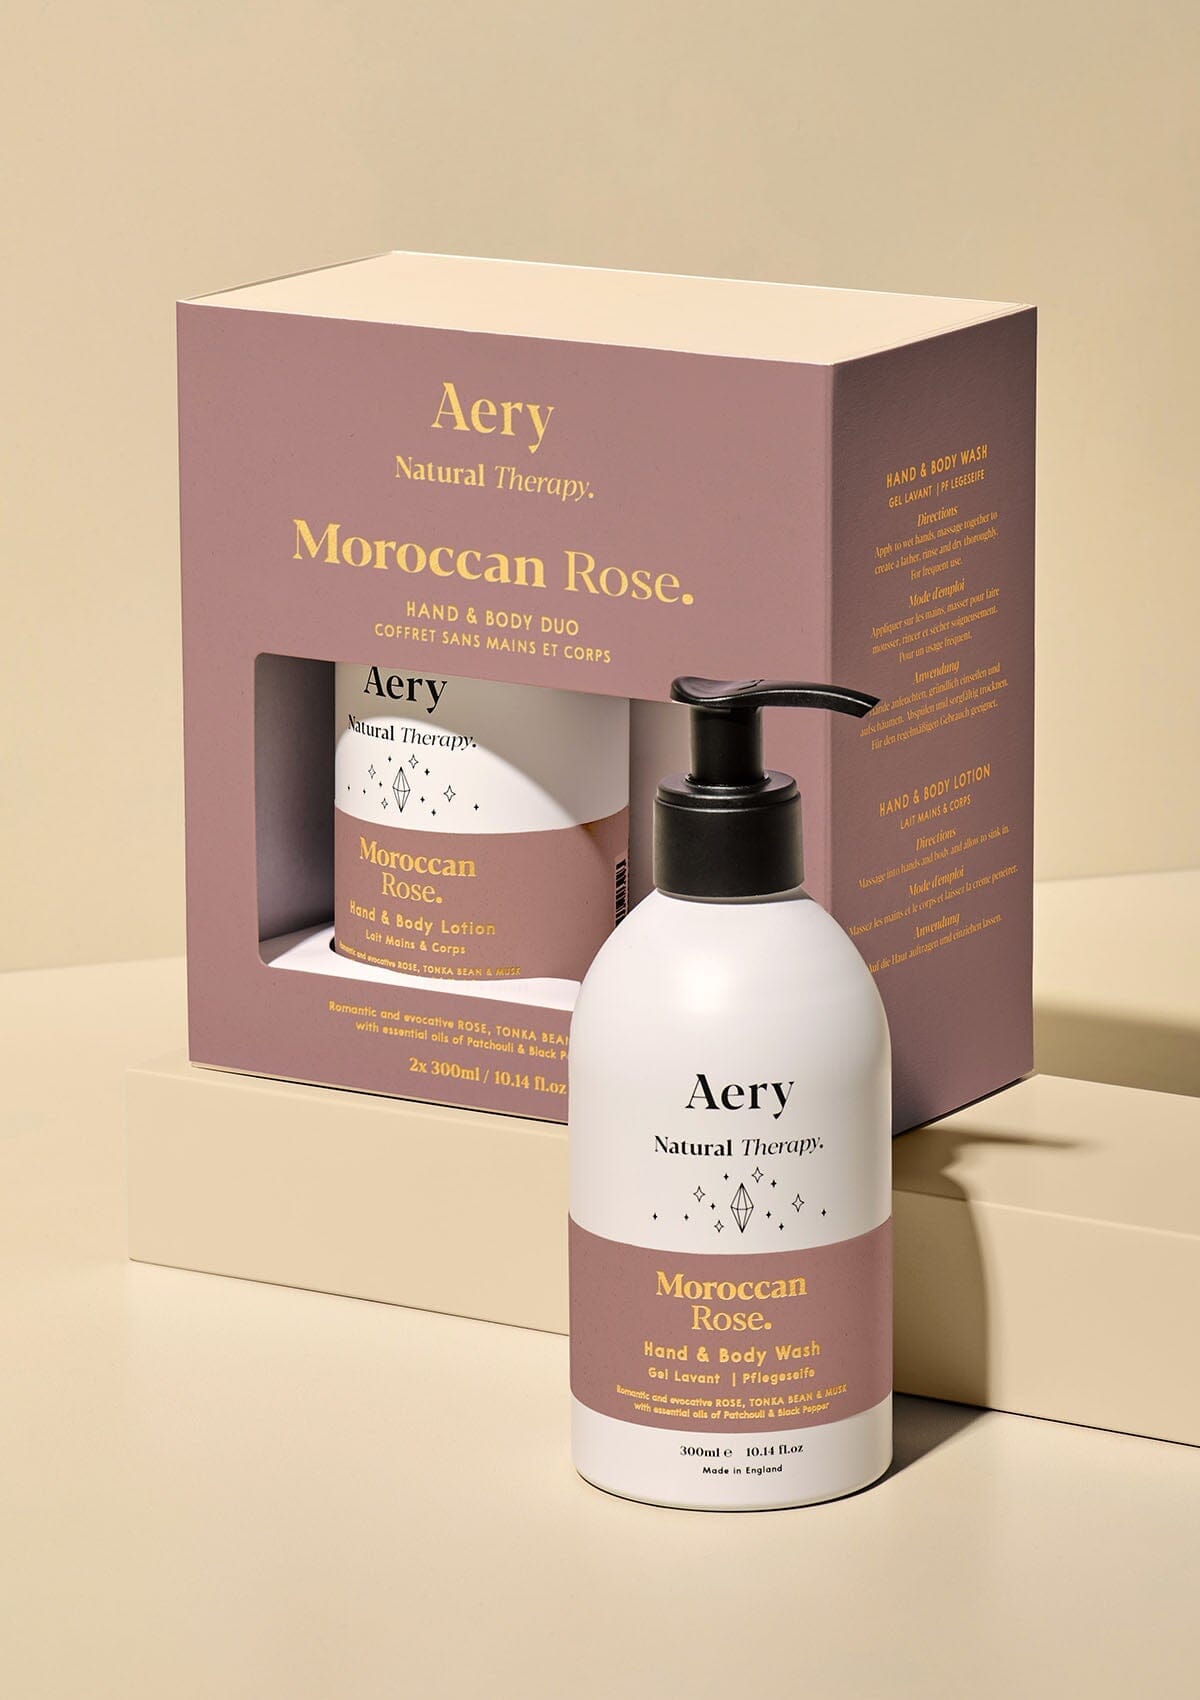 Moroccan Rose Hand & Body Wash and Lotion